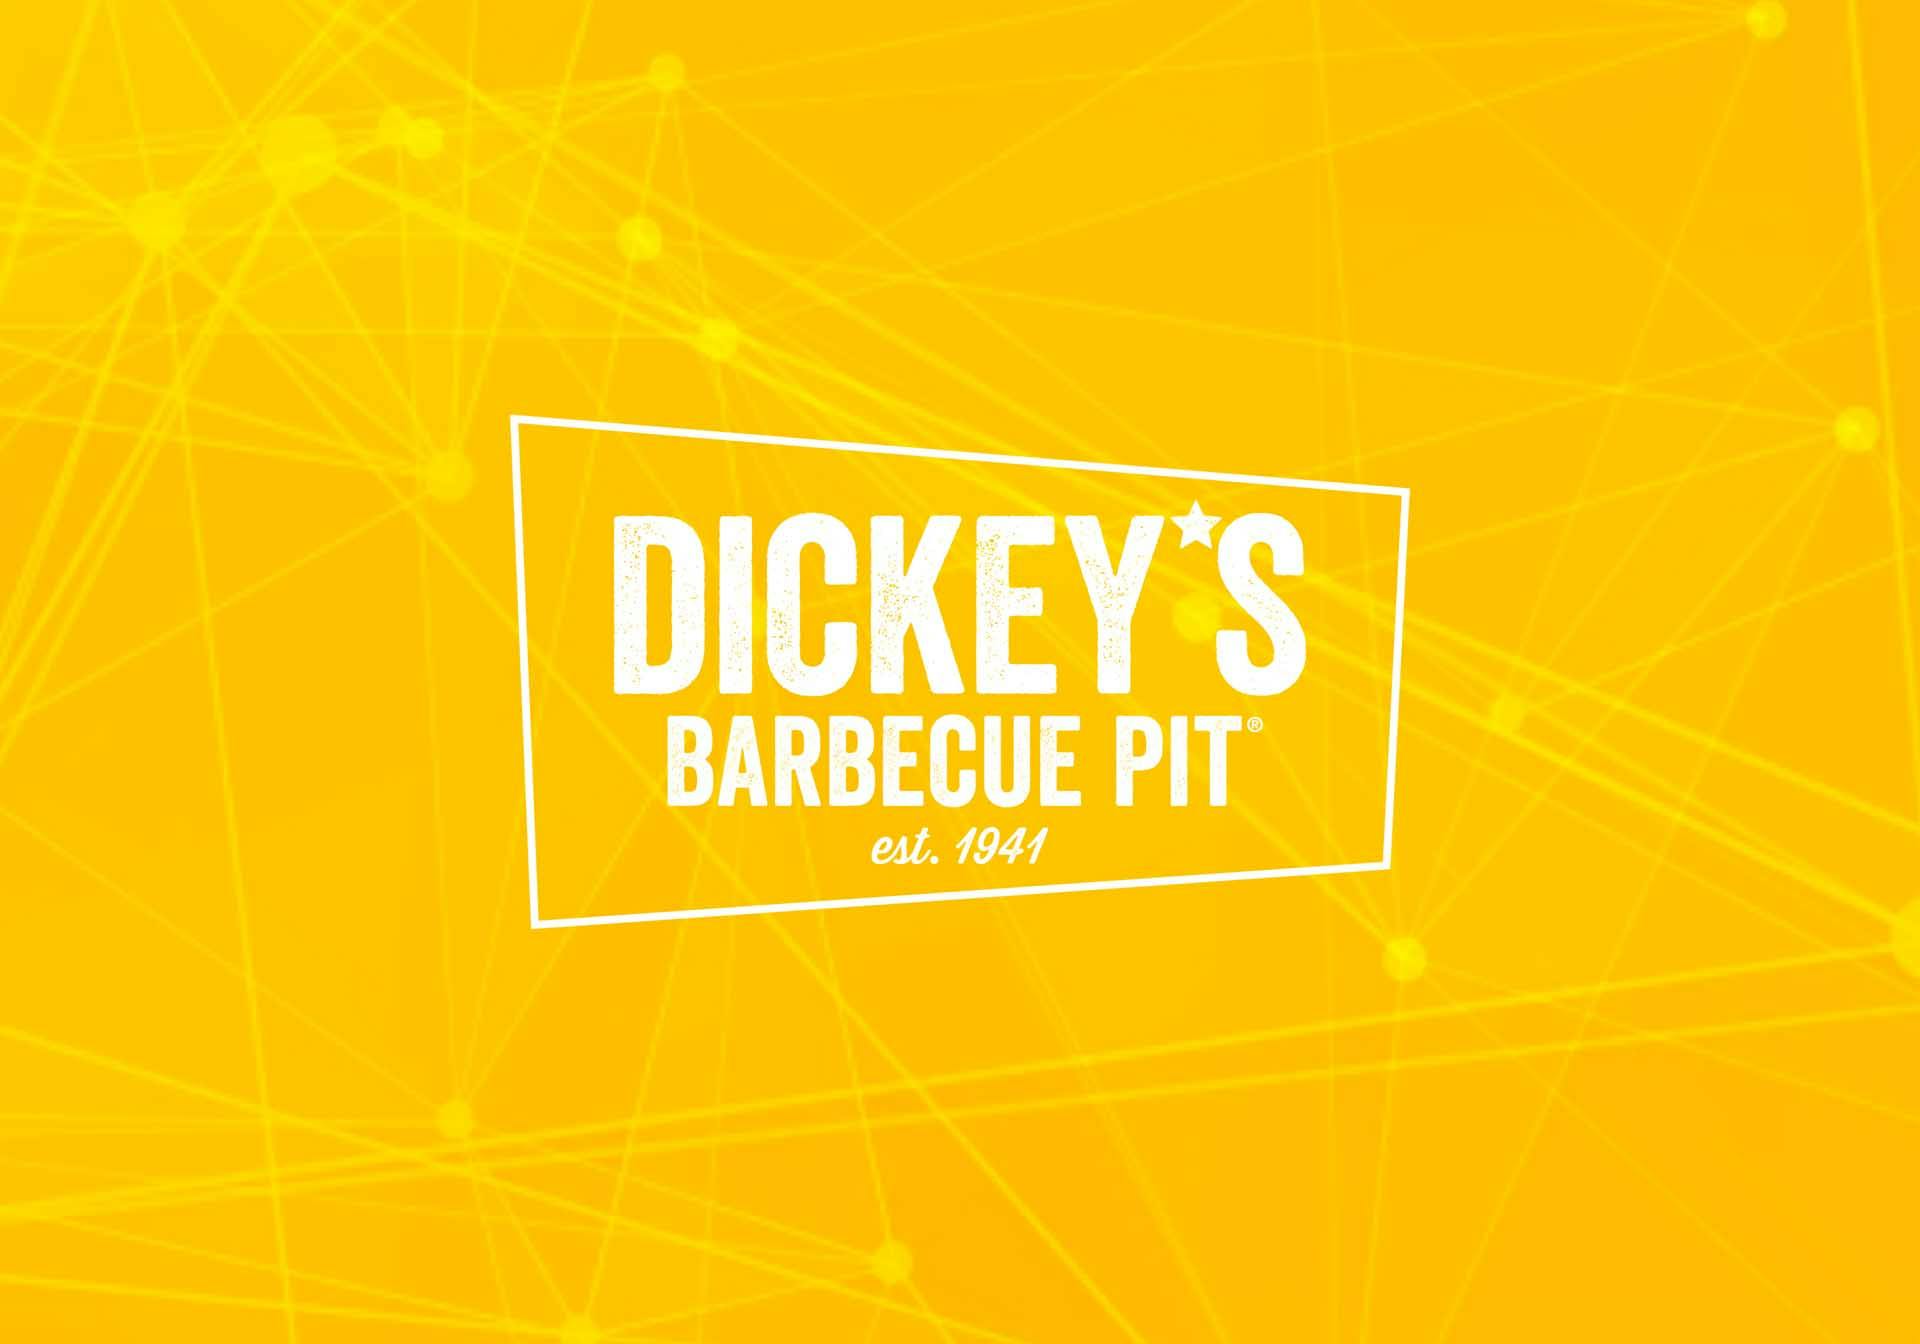 Dickey’s Digital Investments Give Rise to COVID-19 Success Story